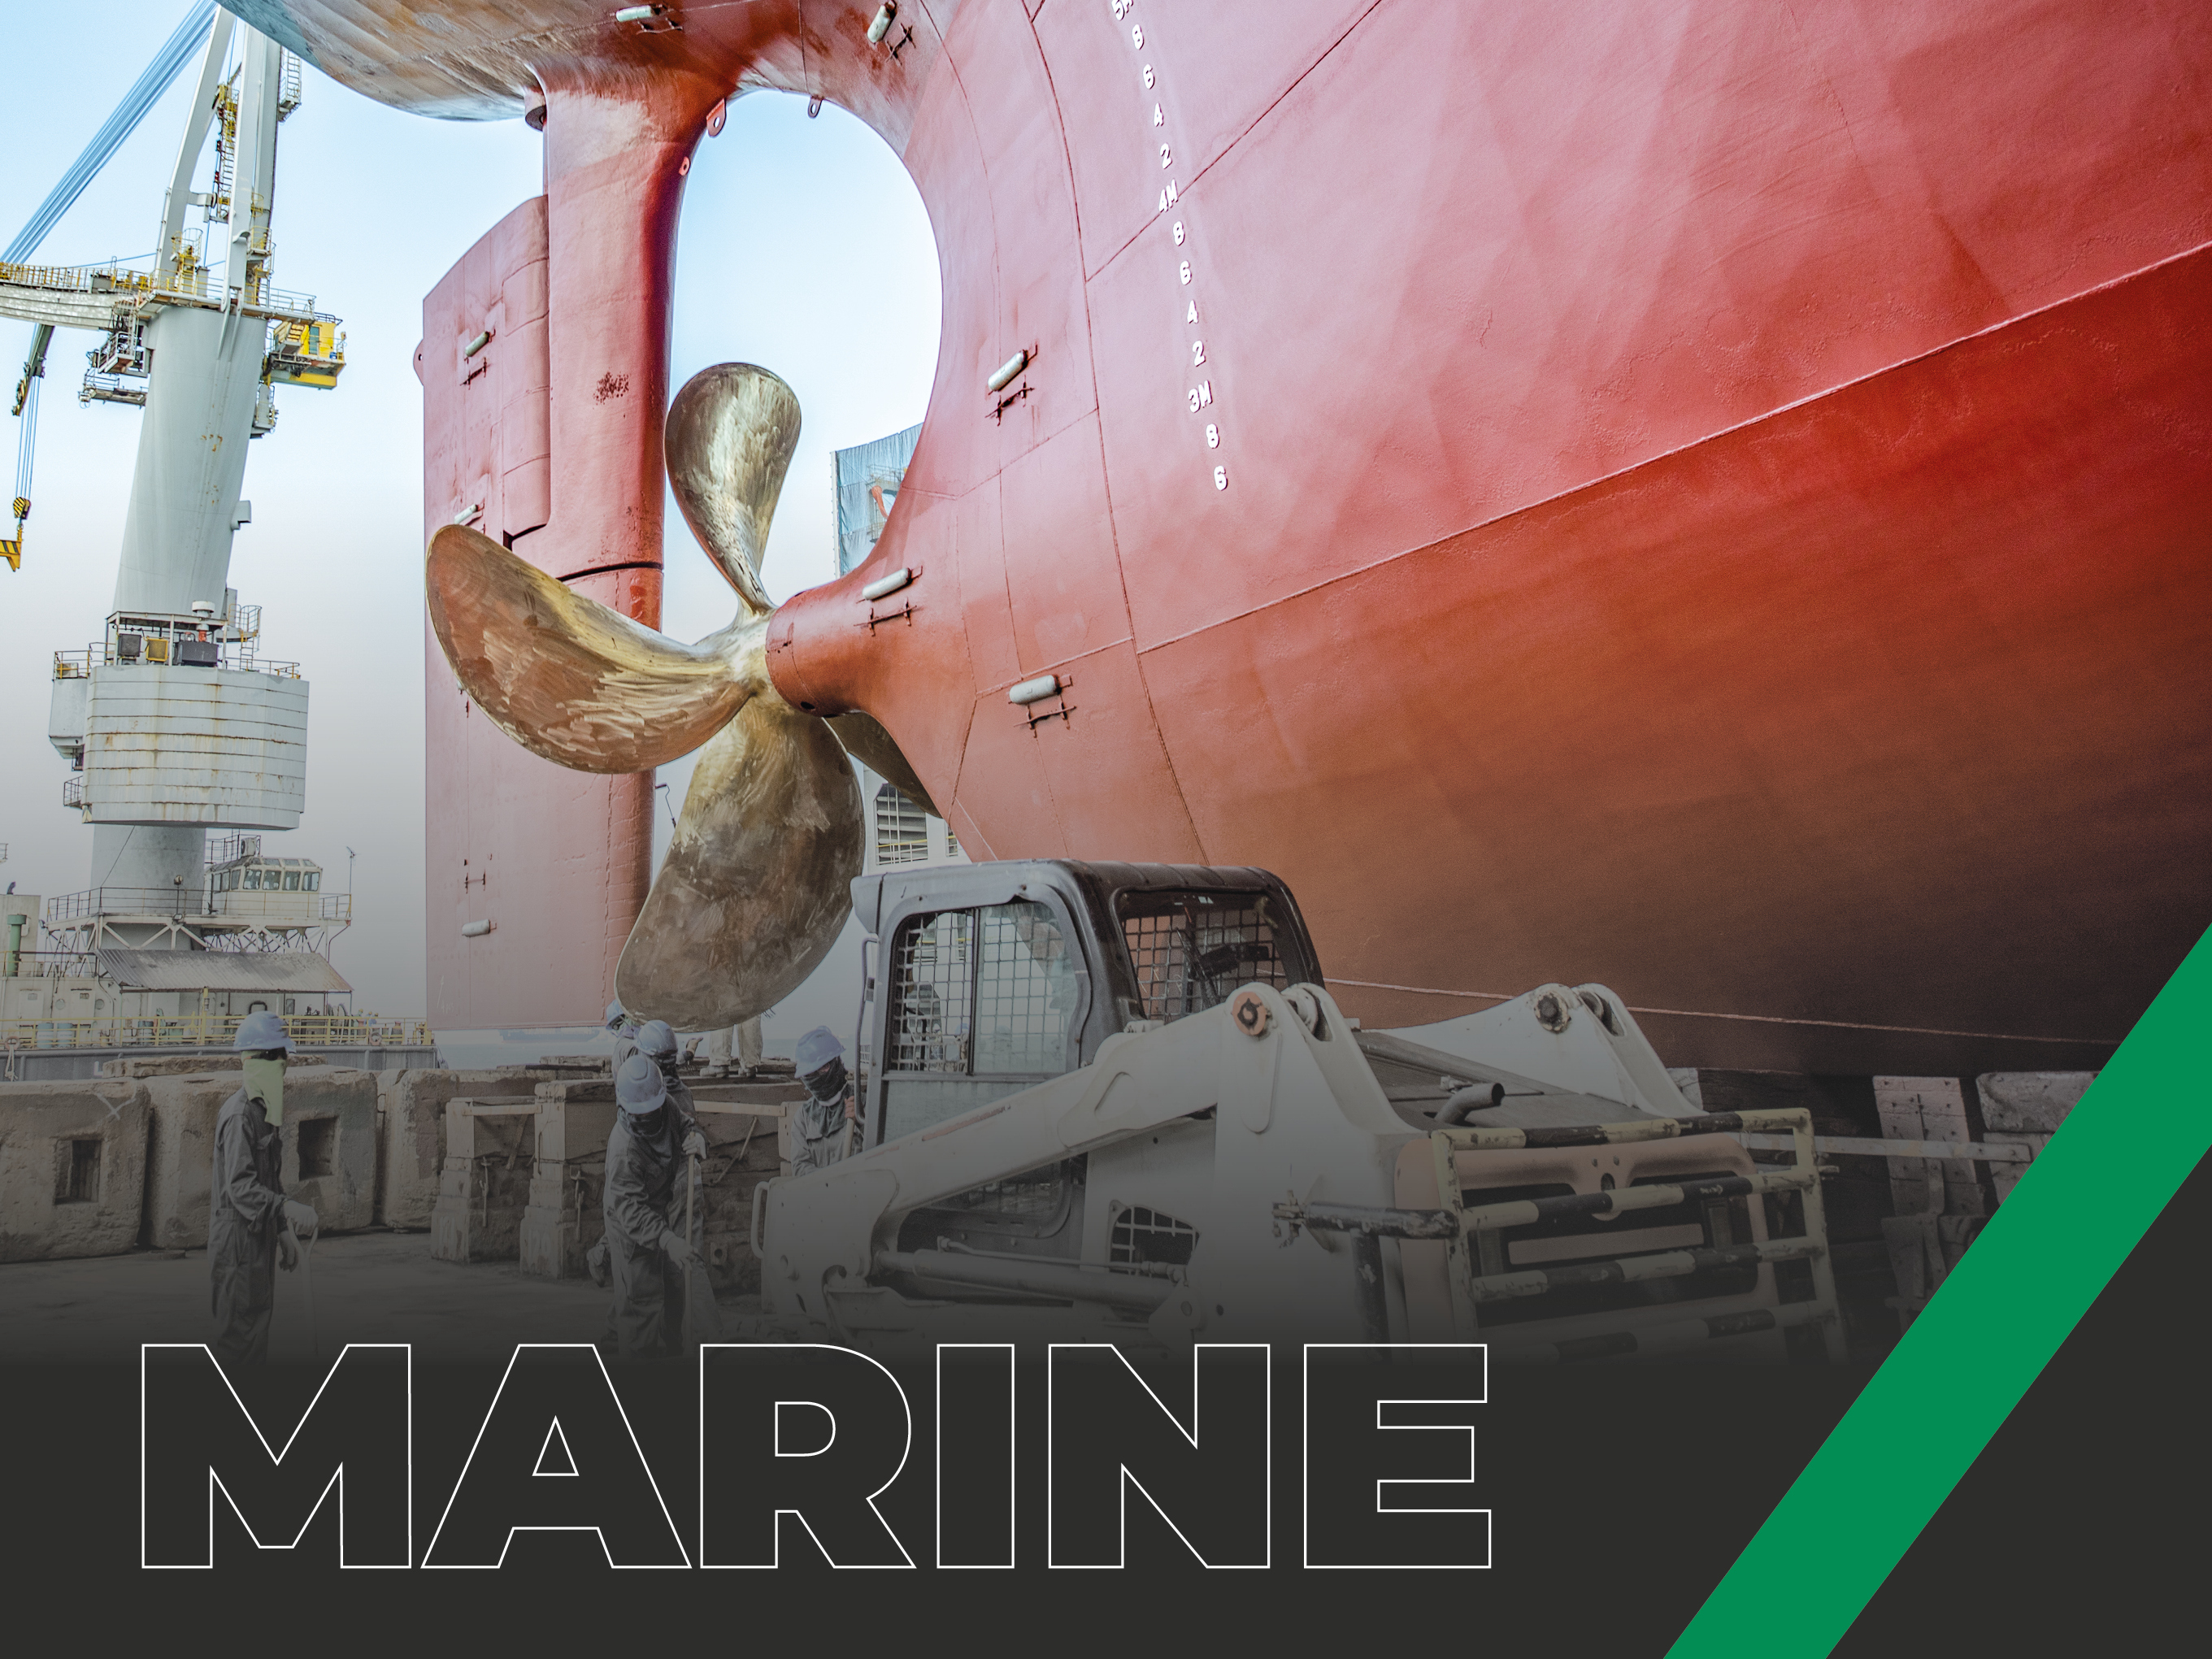 Portable line borers | Maintenance in the marine sector